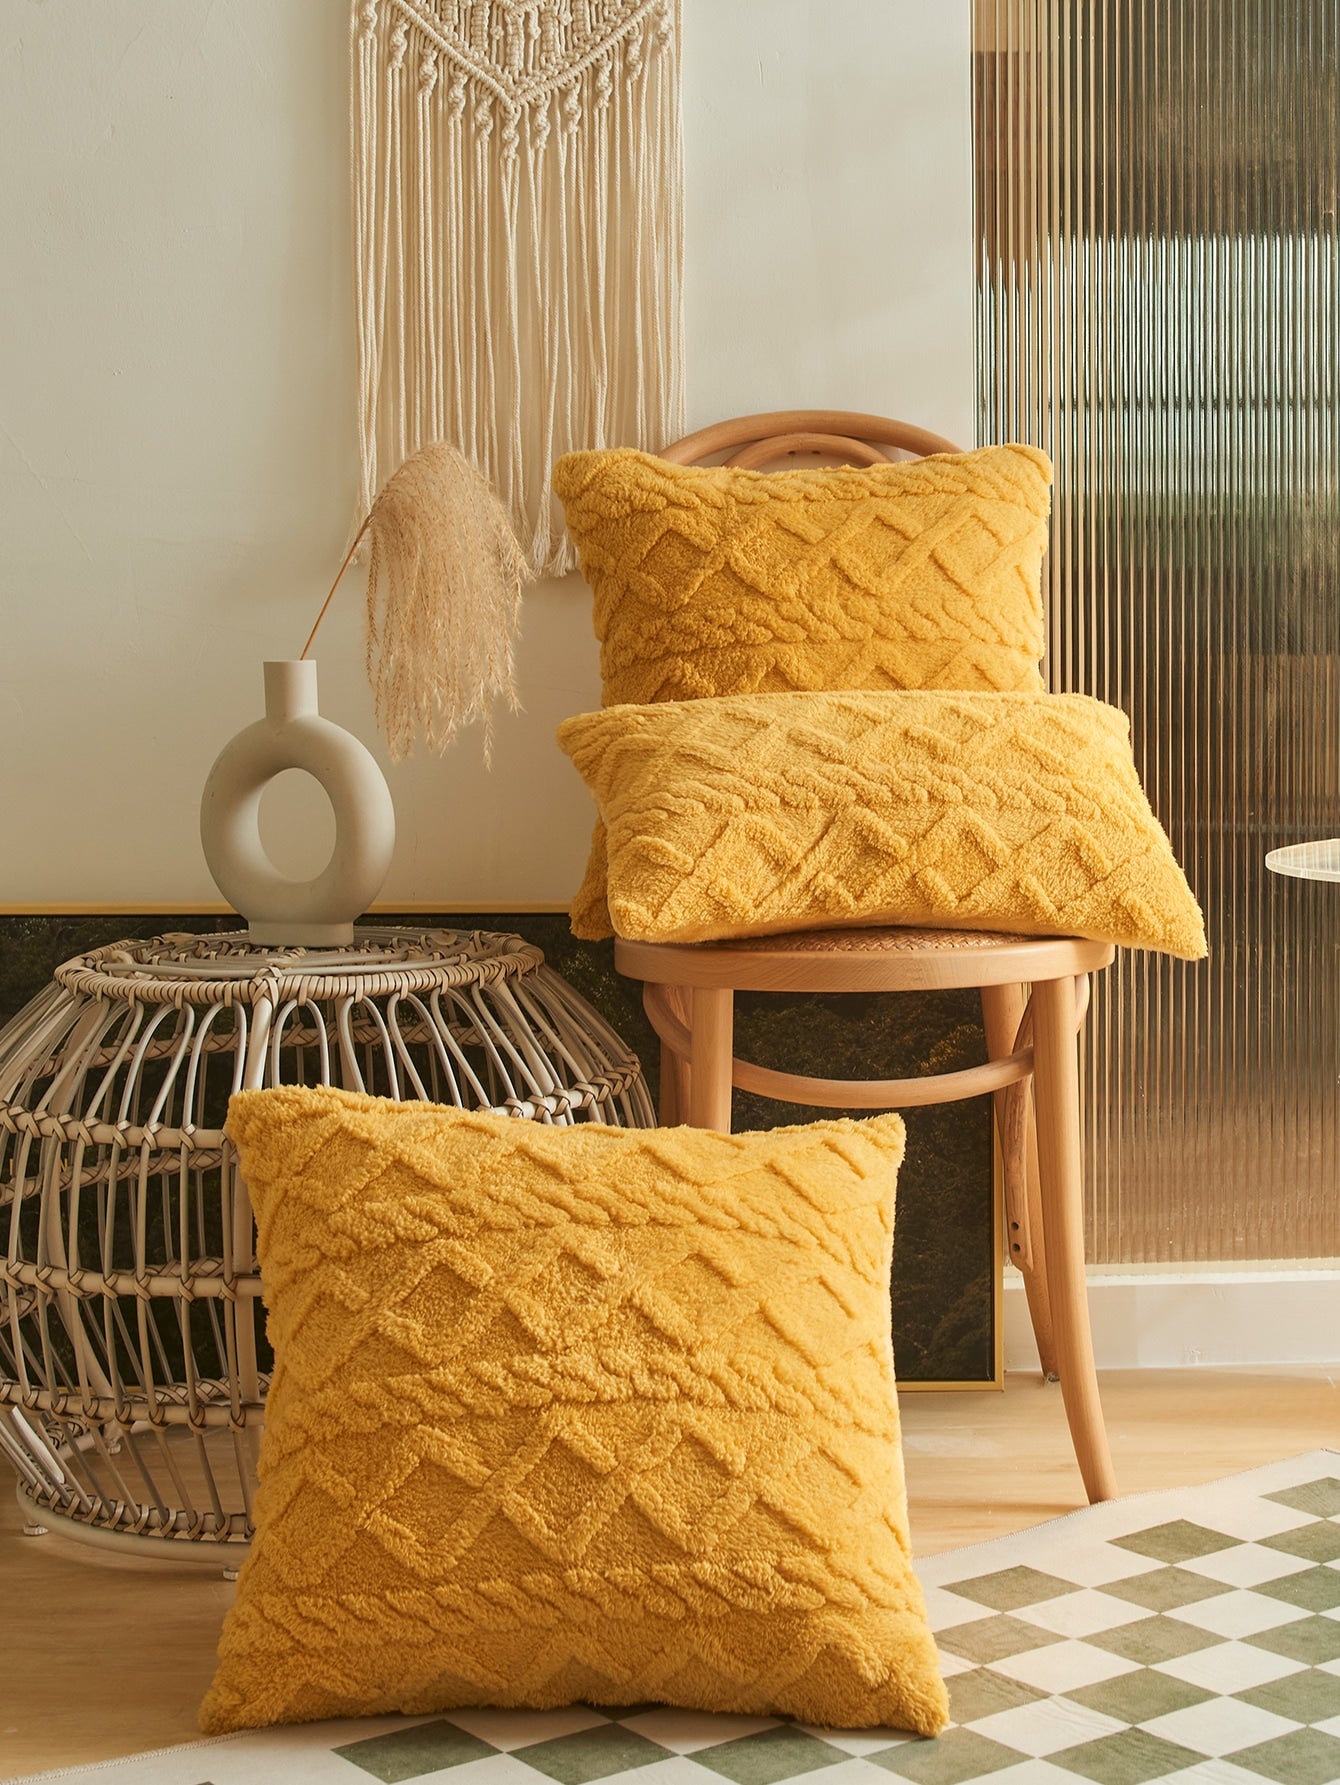 SHEIN 1pc Tufted Cushion Cover Without Filler, Yellow Throw Pillow Case, Pillow Insert Not Include, For Sofa, Home Decor